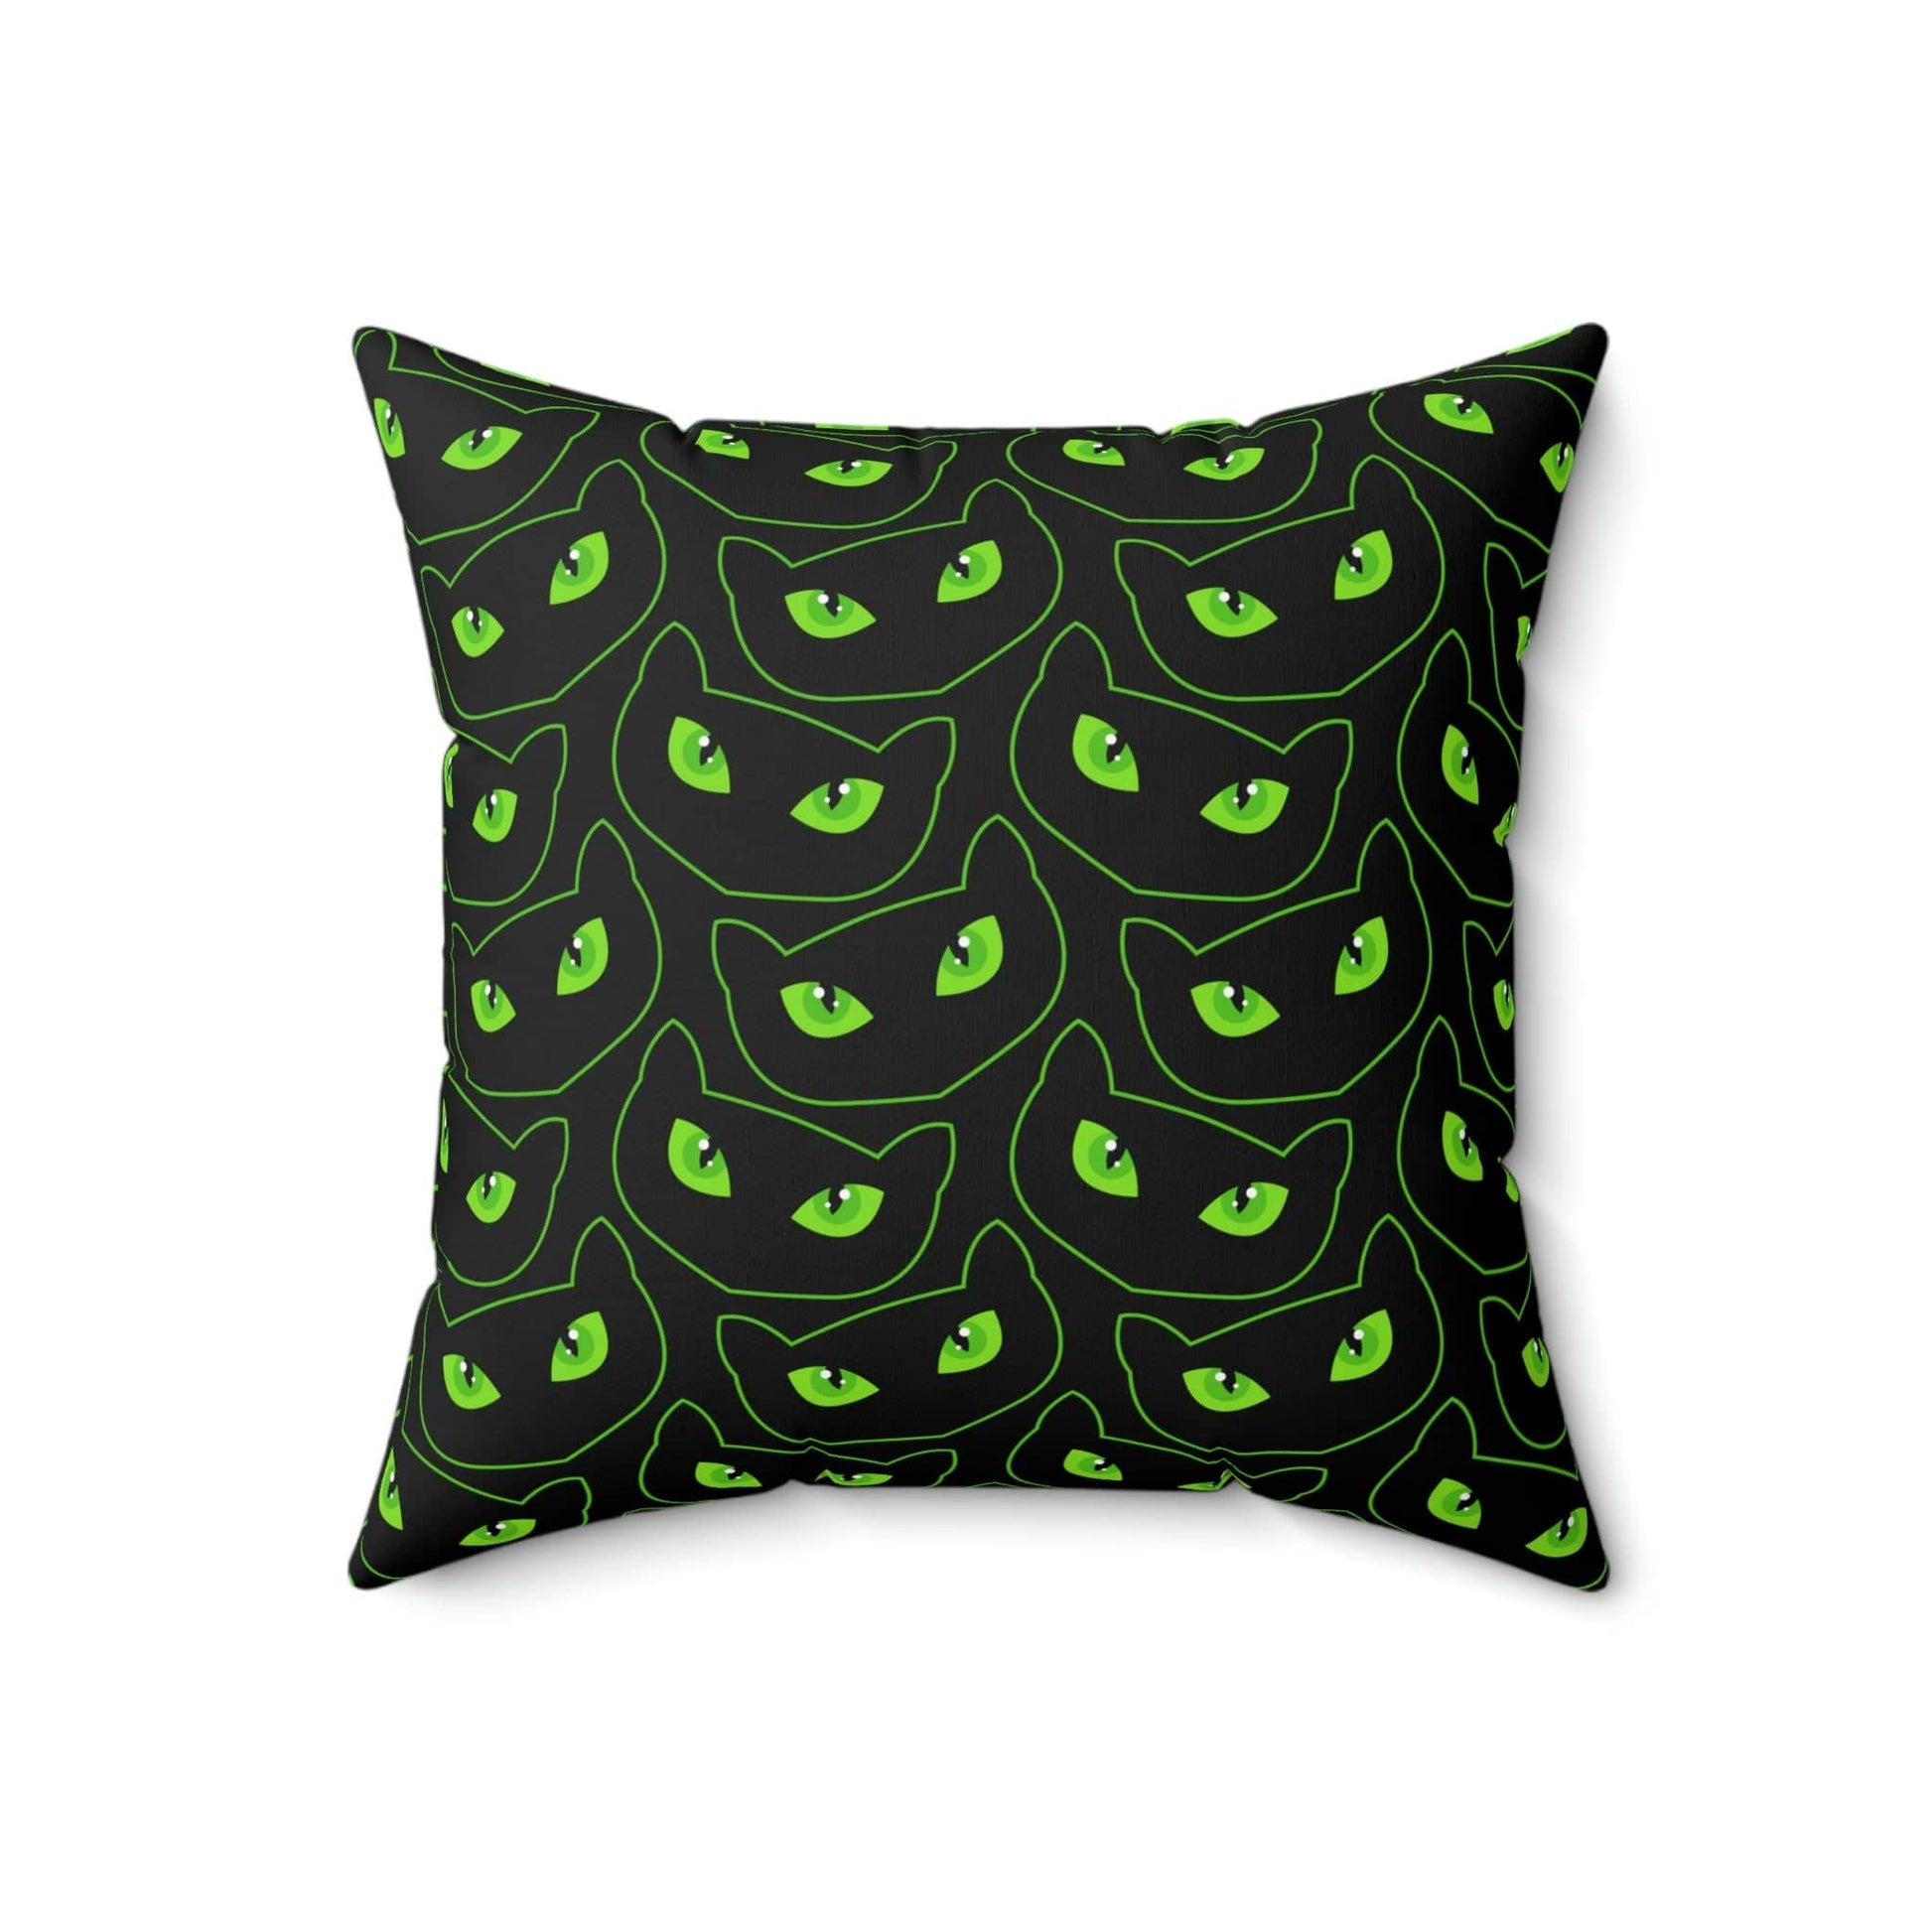 Kate McEnroe New York Halloween Pillow Cover, Spooky Cat Eyes Pillow Case Throw Pillow Covers 18" × 18" 3549431917